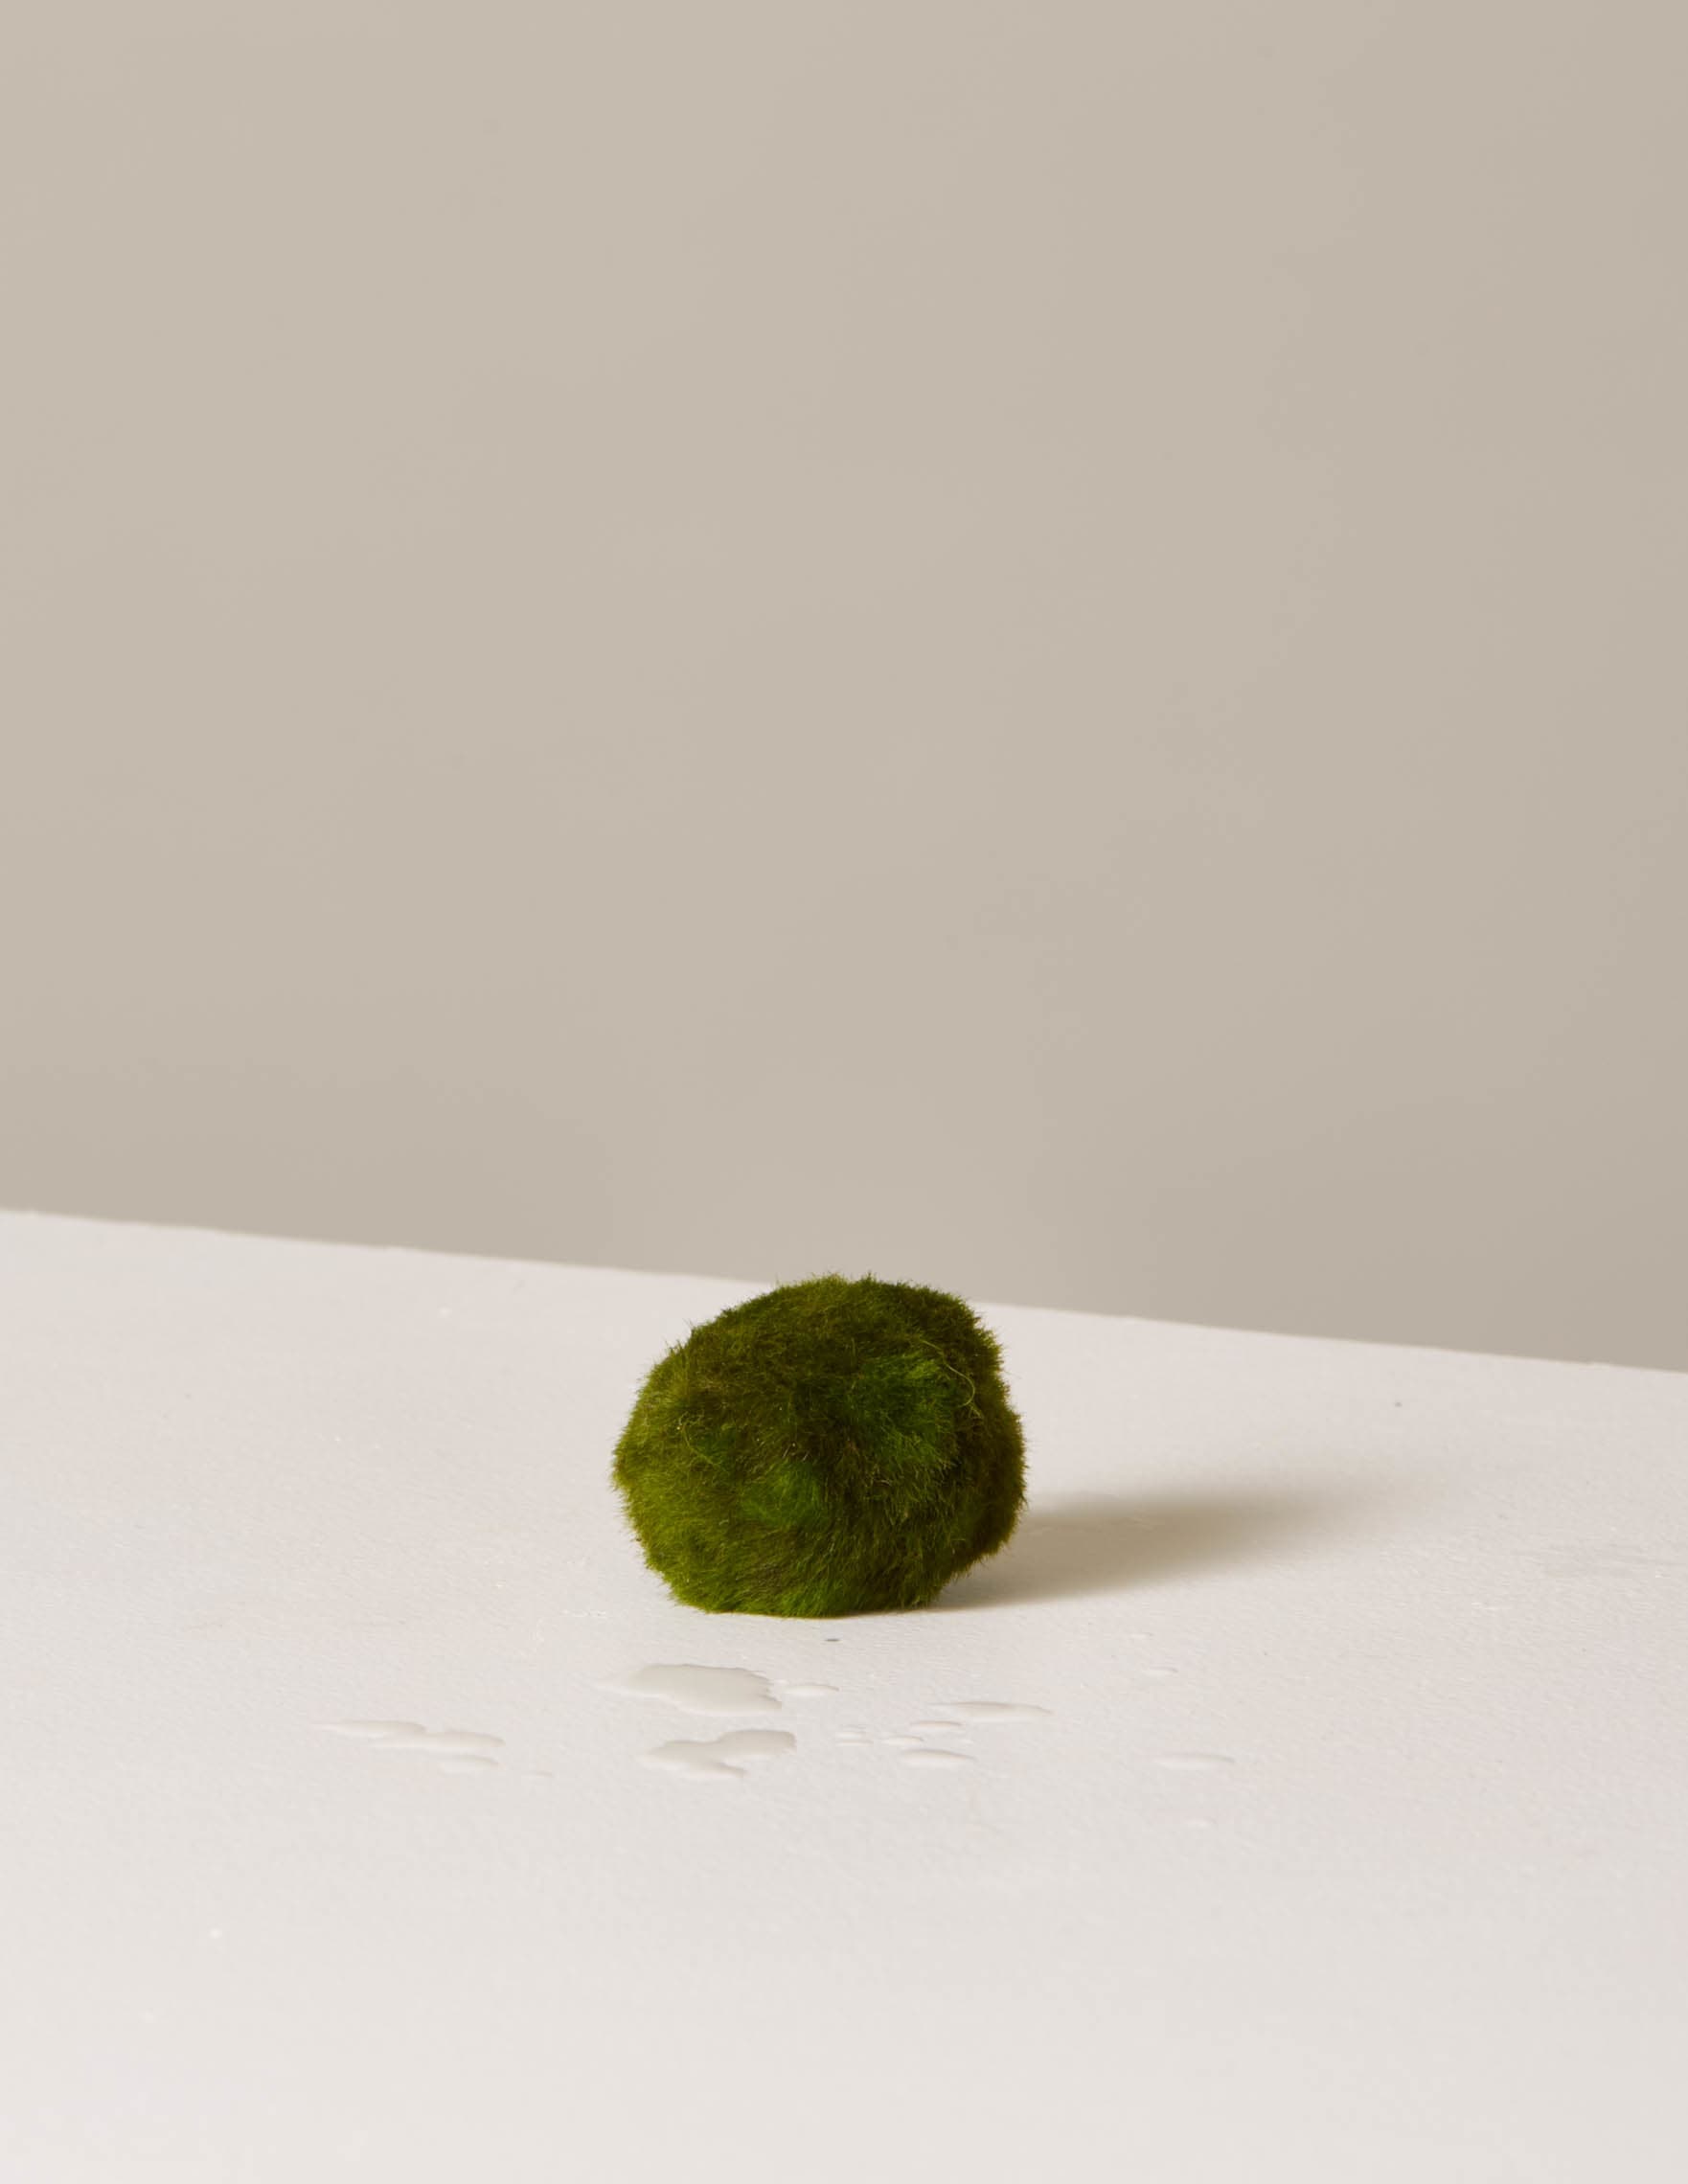 How to Care for a Marimo Moss Ball